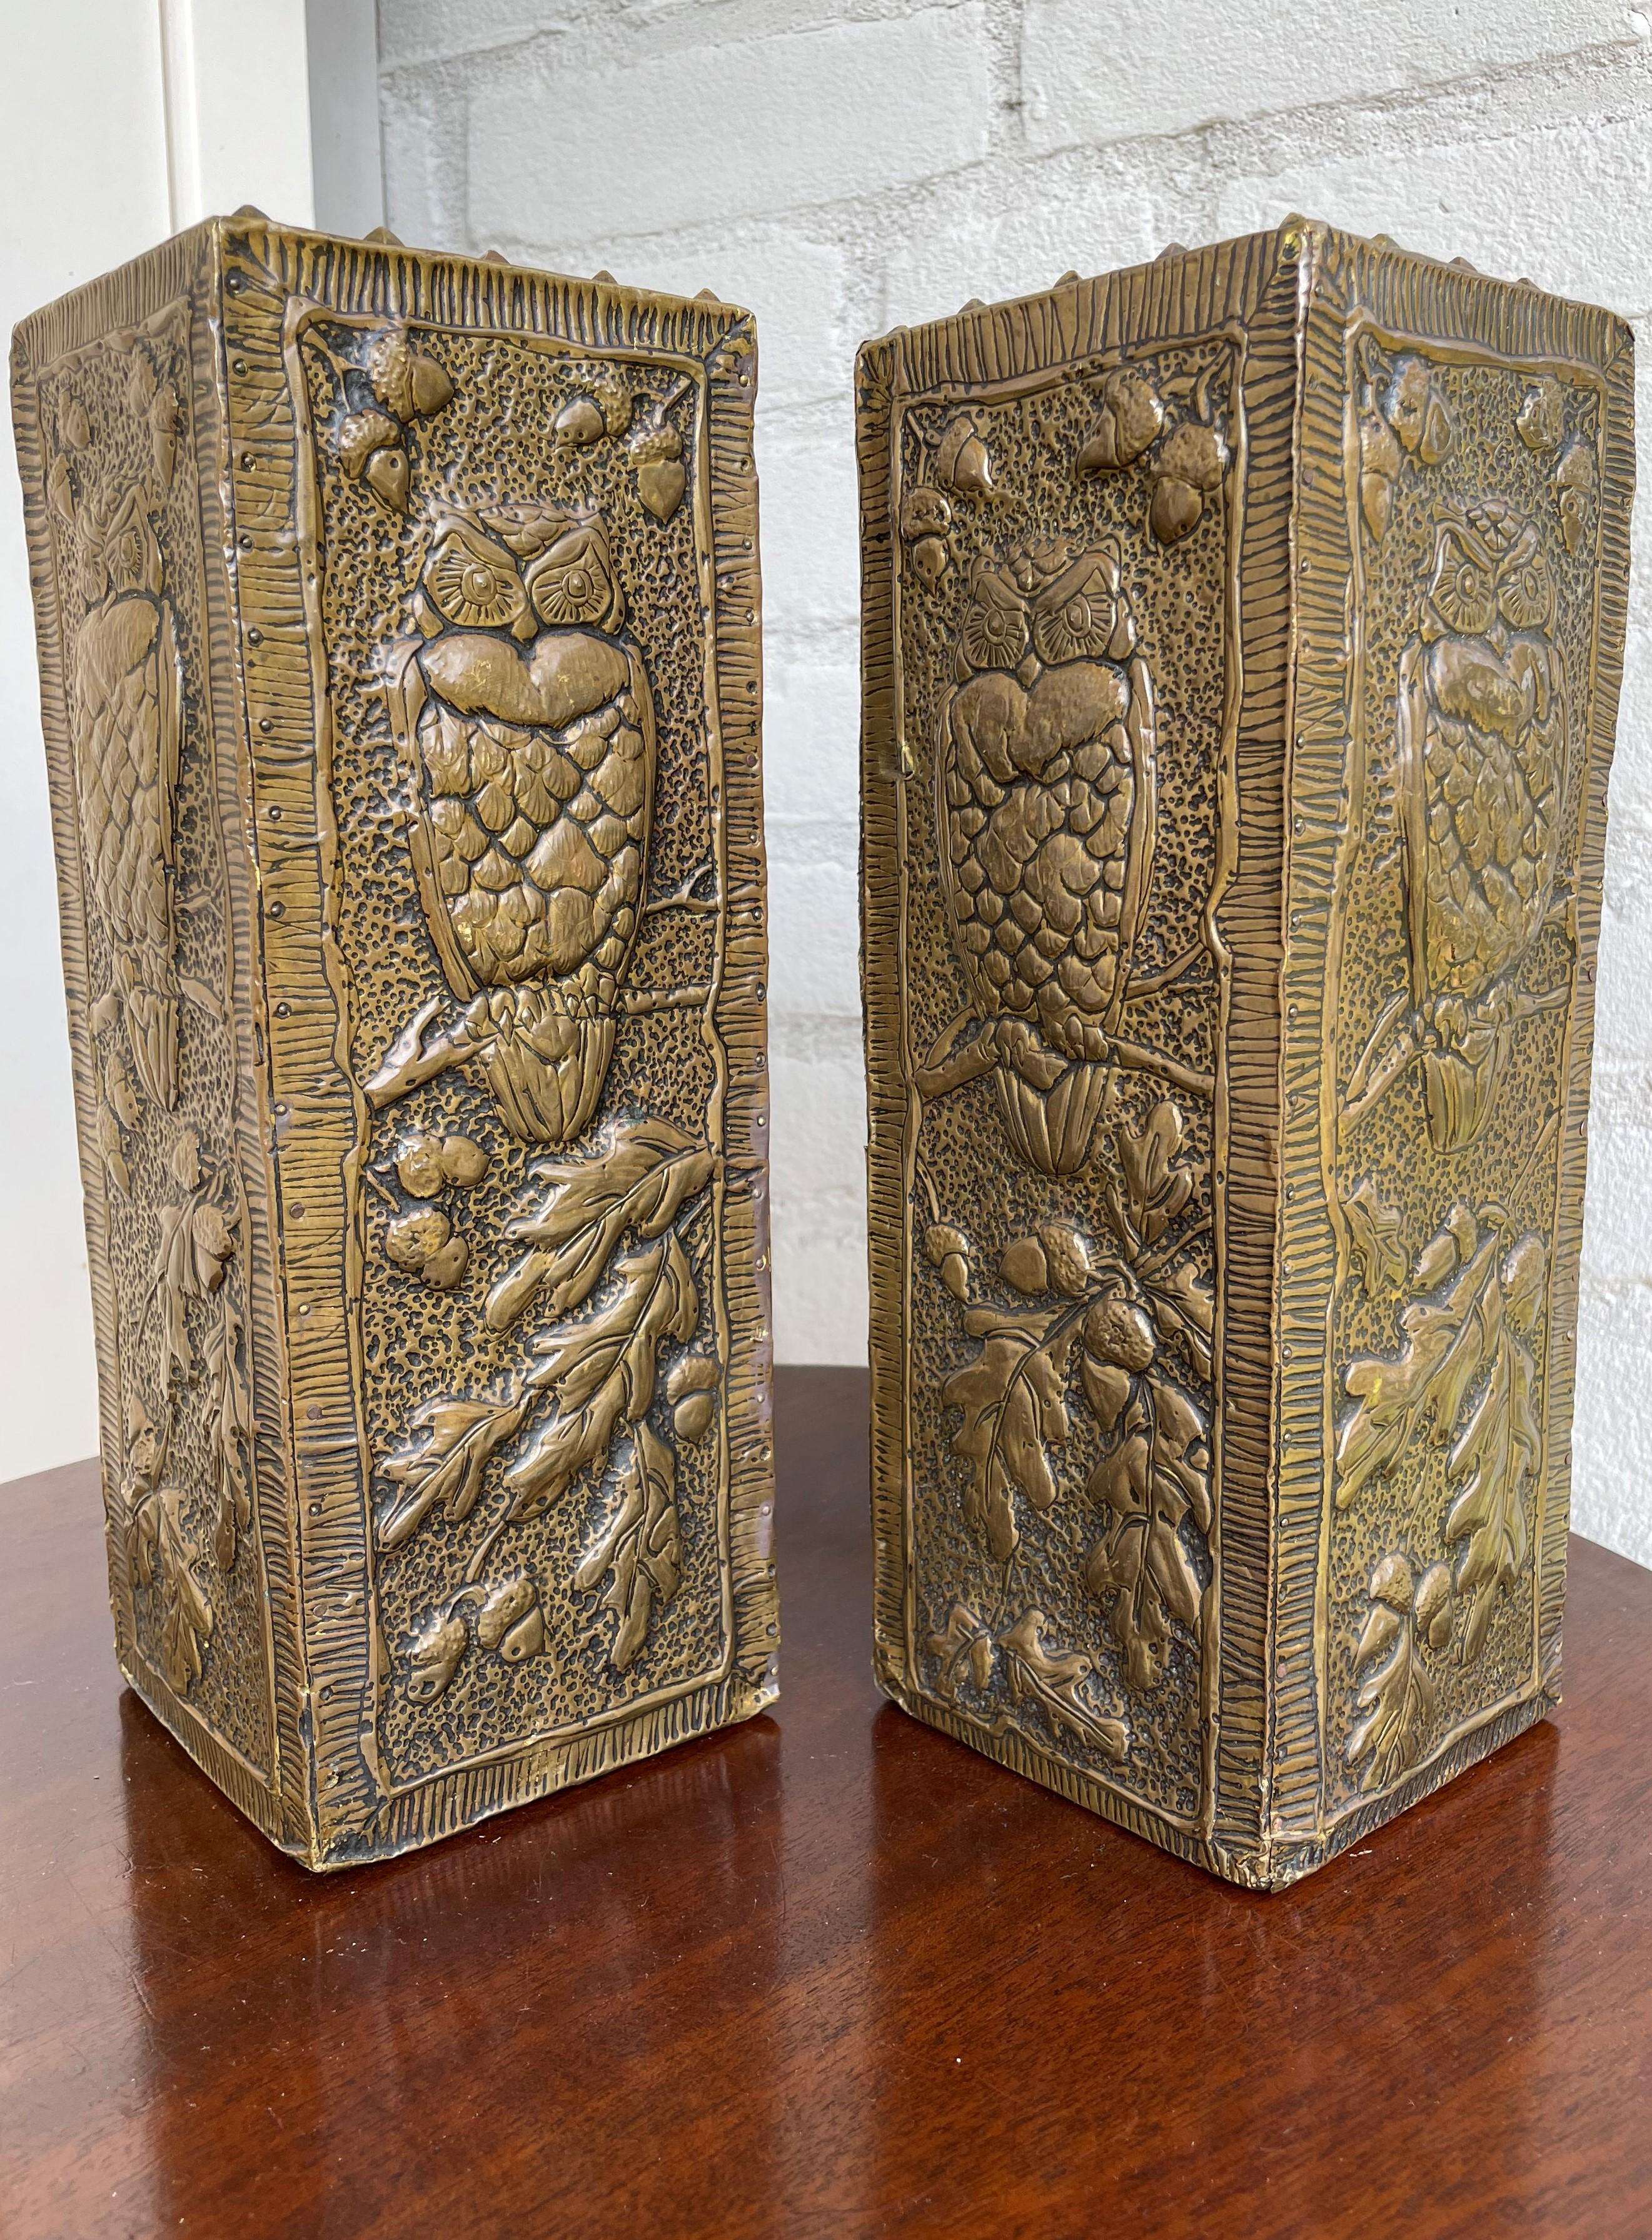 Antique and Unique Arts & Crafts Pair of Embossed Brass Vases w. Owl Sculptures For Sale 10